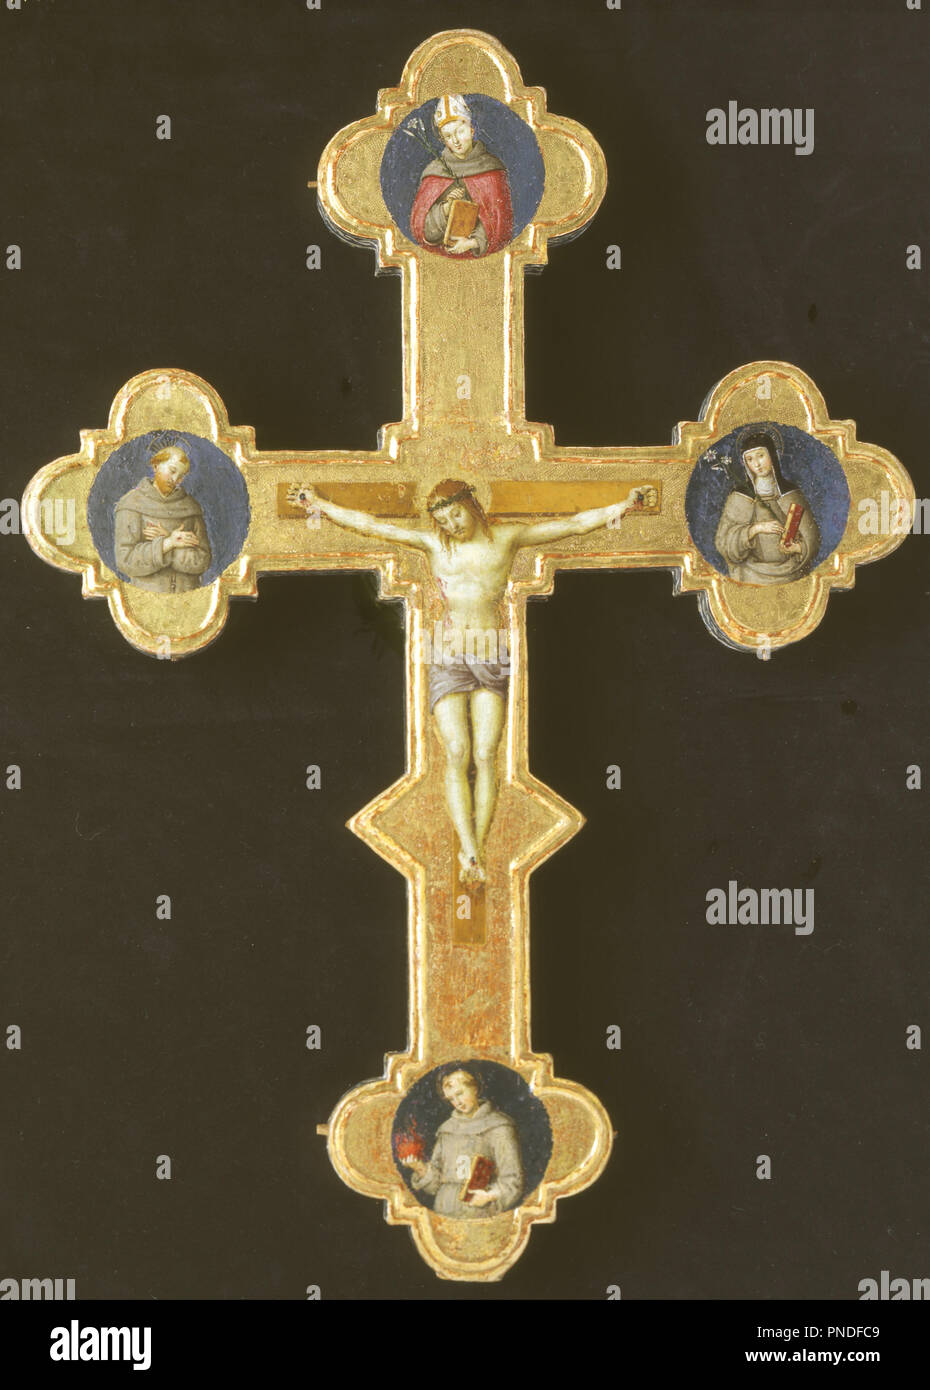 Processioned Cross with Franciscan Saints (verso). Date/Period: 1500 - 1502. Panel. Height: 46.80 mm (1.84 in); Width: 31 mm (1.22 in). Author: Attributed to Raffaello Santi. Stock Photo